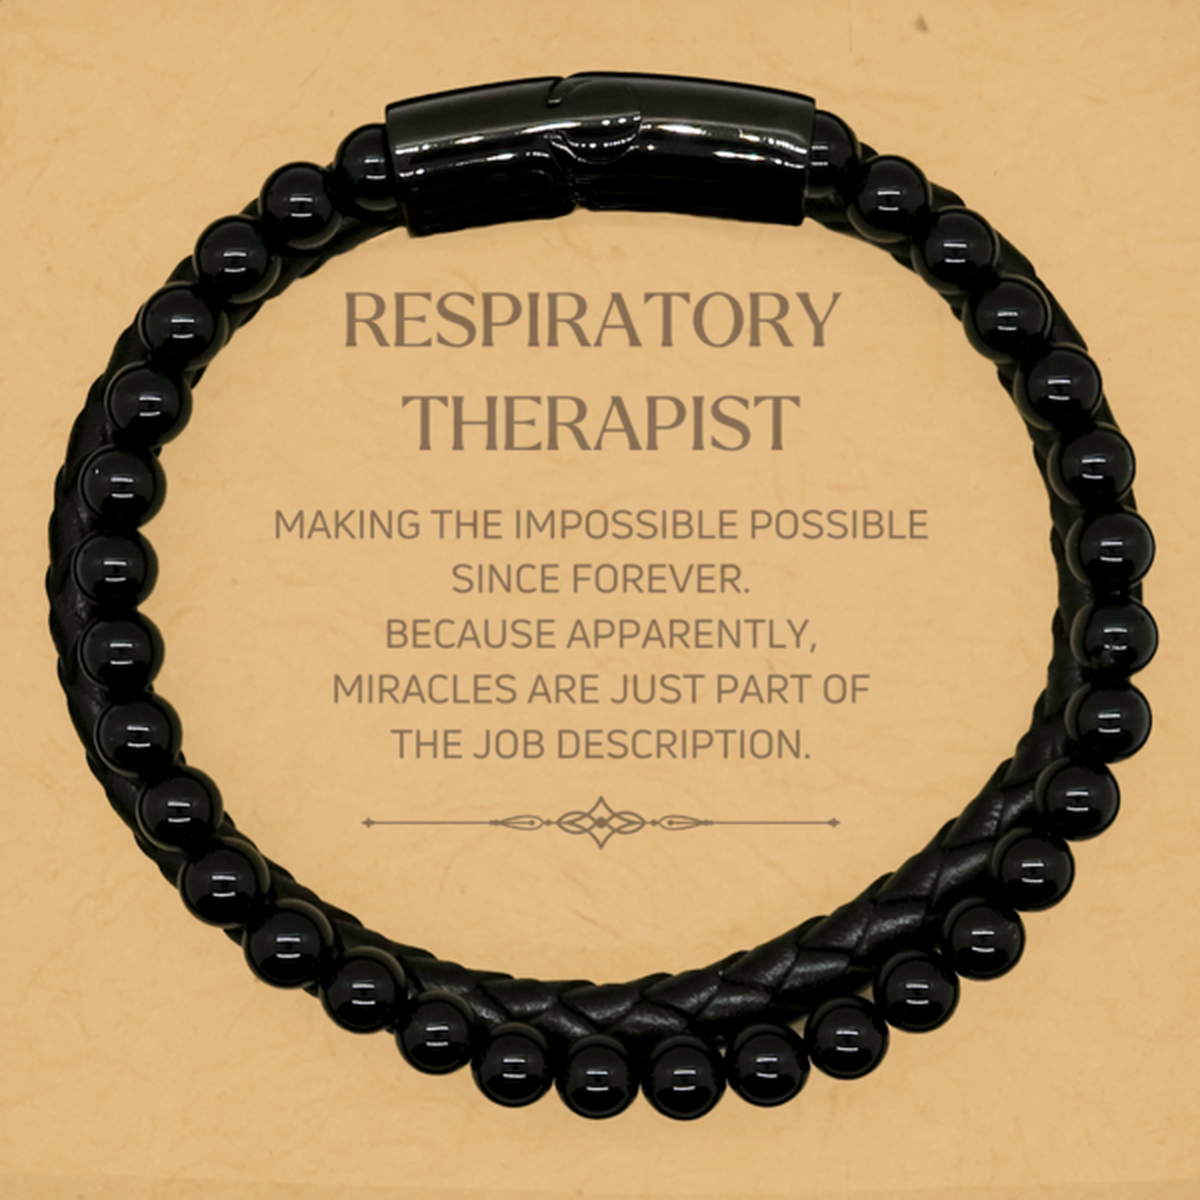 Funny Respiratory Therapist Gifts, Miracles are just part of the job description, Inspirational Birthday Stone Leather Bracelets For Respiratory Therapist, Men, Women, Coworkers, Friends, Boss